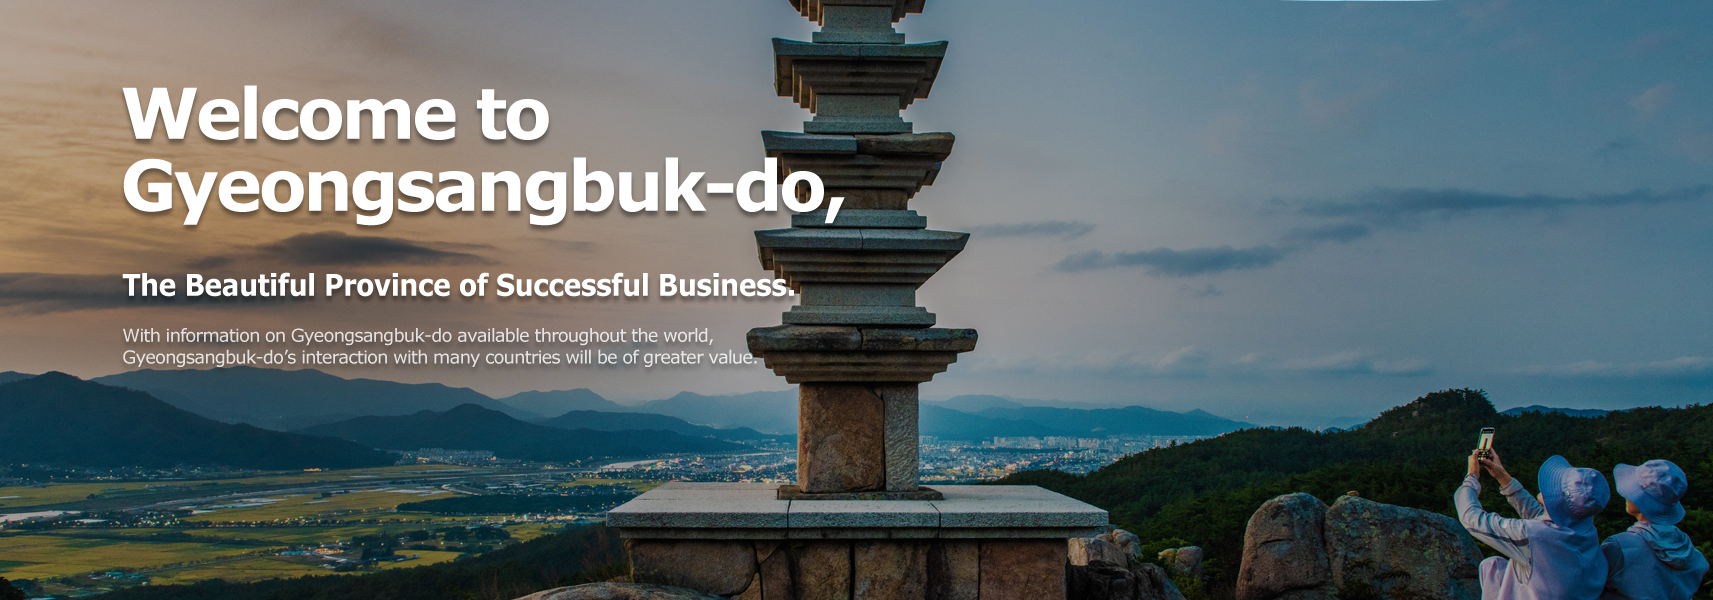 Welcome to Gyeongsangbuk-do, The Beautiful Province of Successful Business. With information on Gyeongsangbuk-do available throughout the world, Gyeongsangbuk-do’s interaction with many countries will be of greater value.